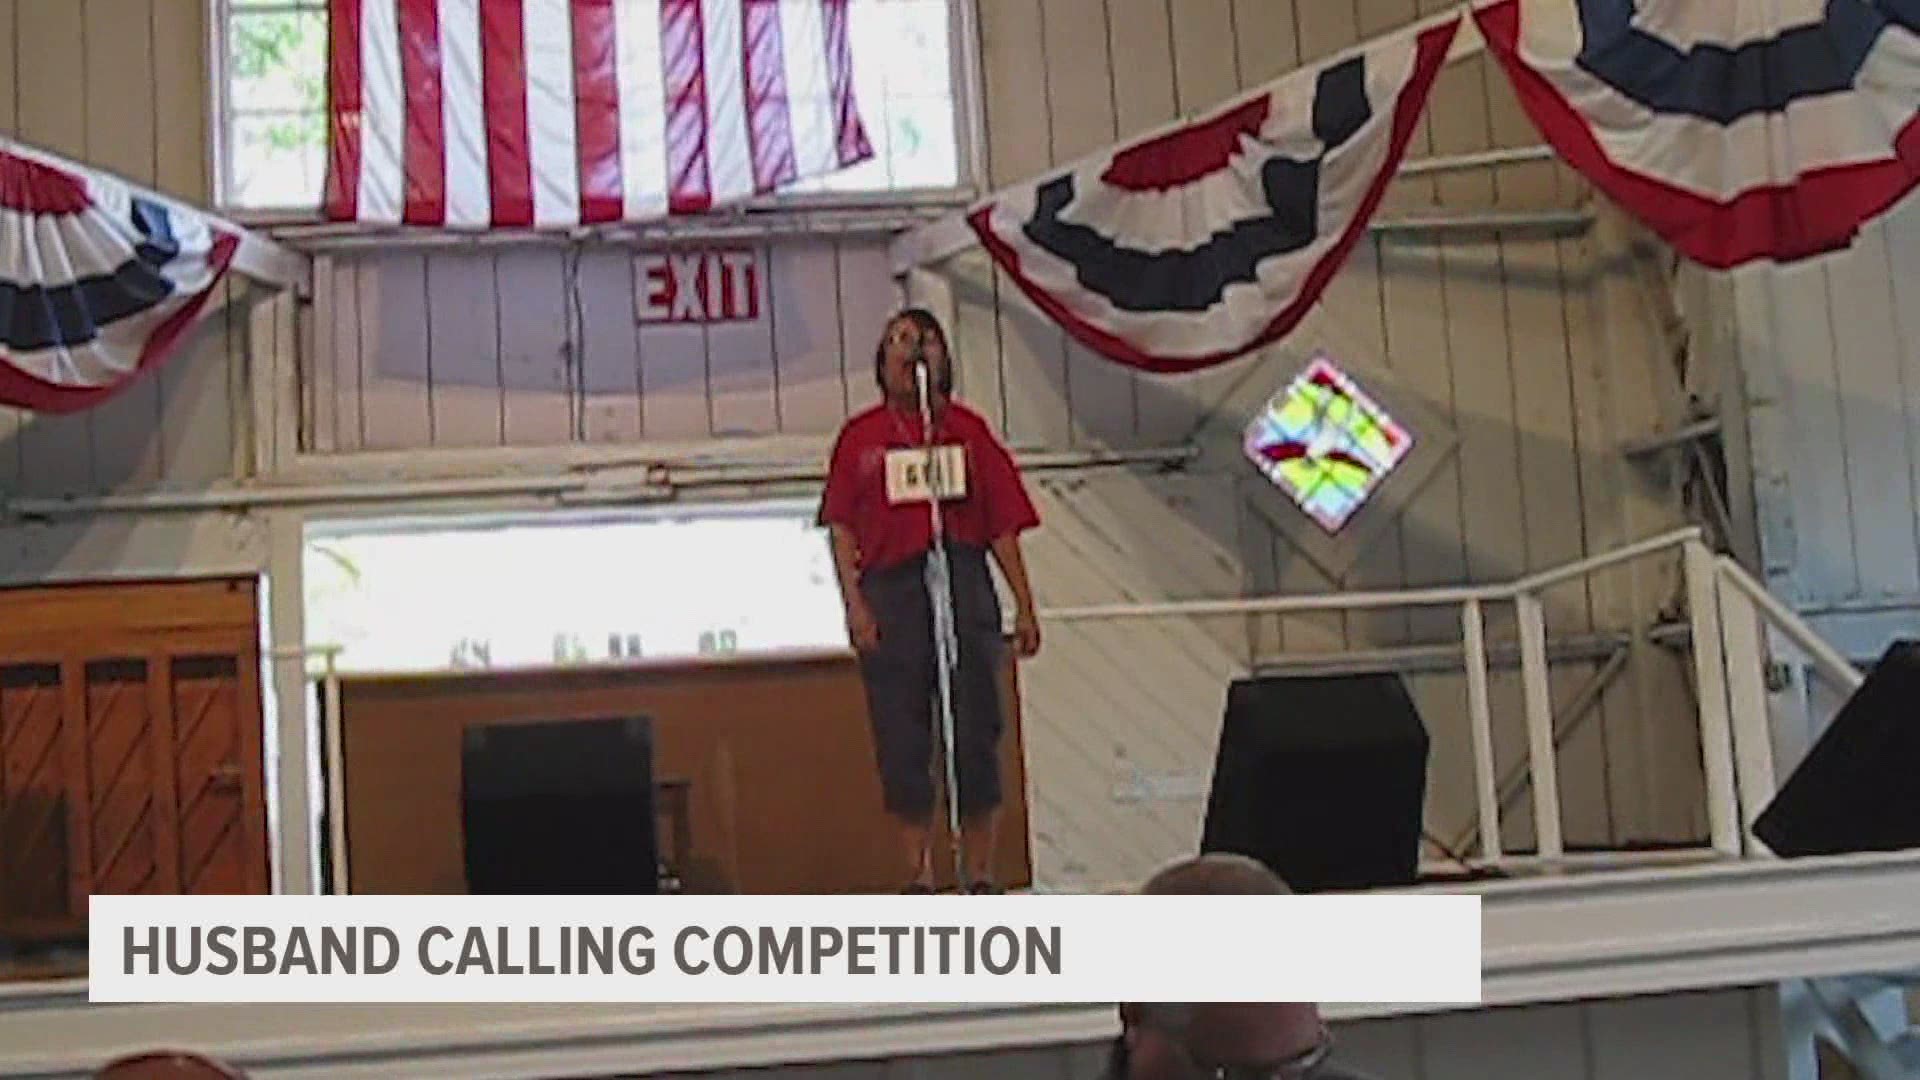 It was after Rose Baulregaurd picked up the daily schedule flyer during the 2003 Iowa State Fair she decided to try her talents at the husband calling competition.